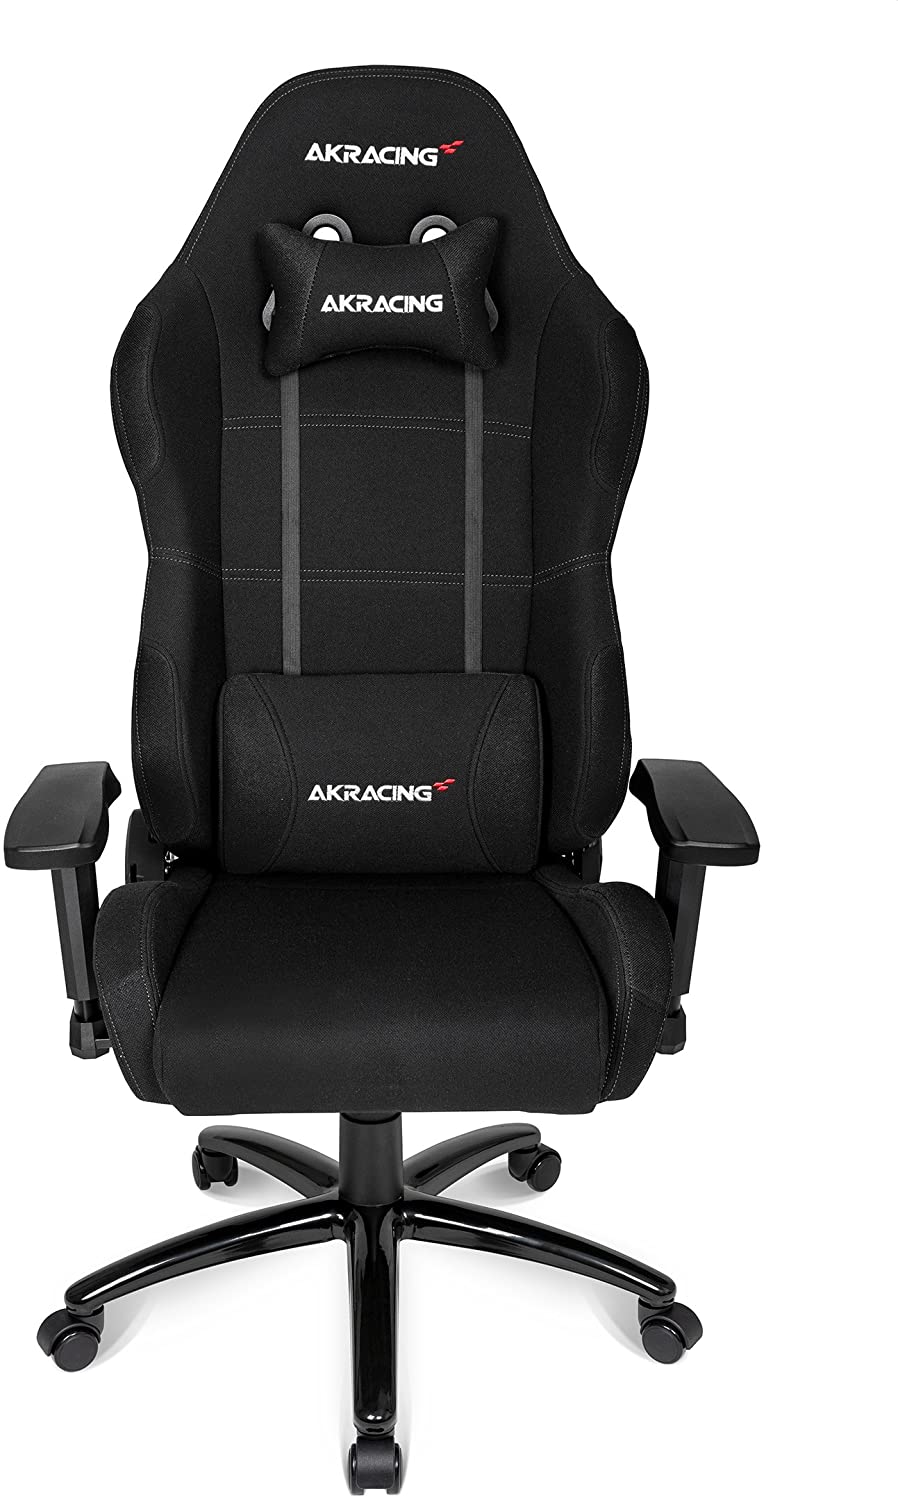 5. AKRacing Core Series EX ( Adjustable Arm-Rest Gaming Chair )